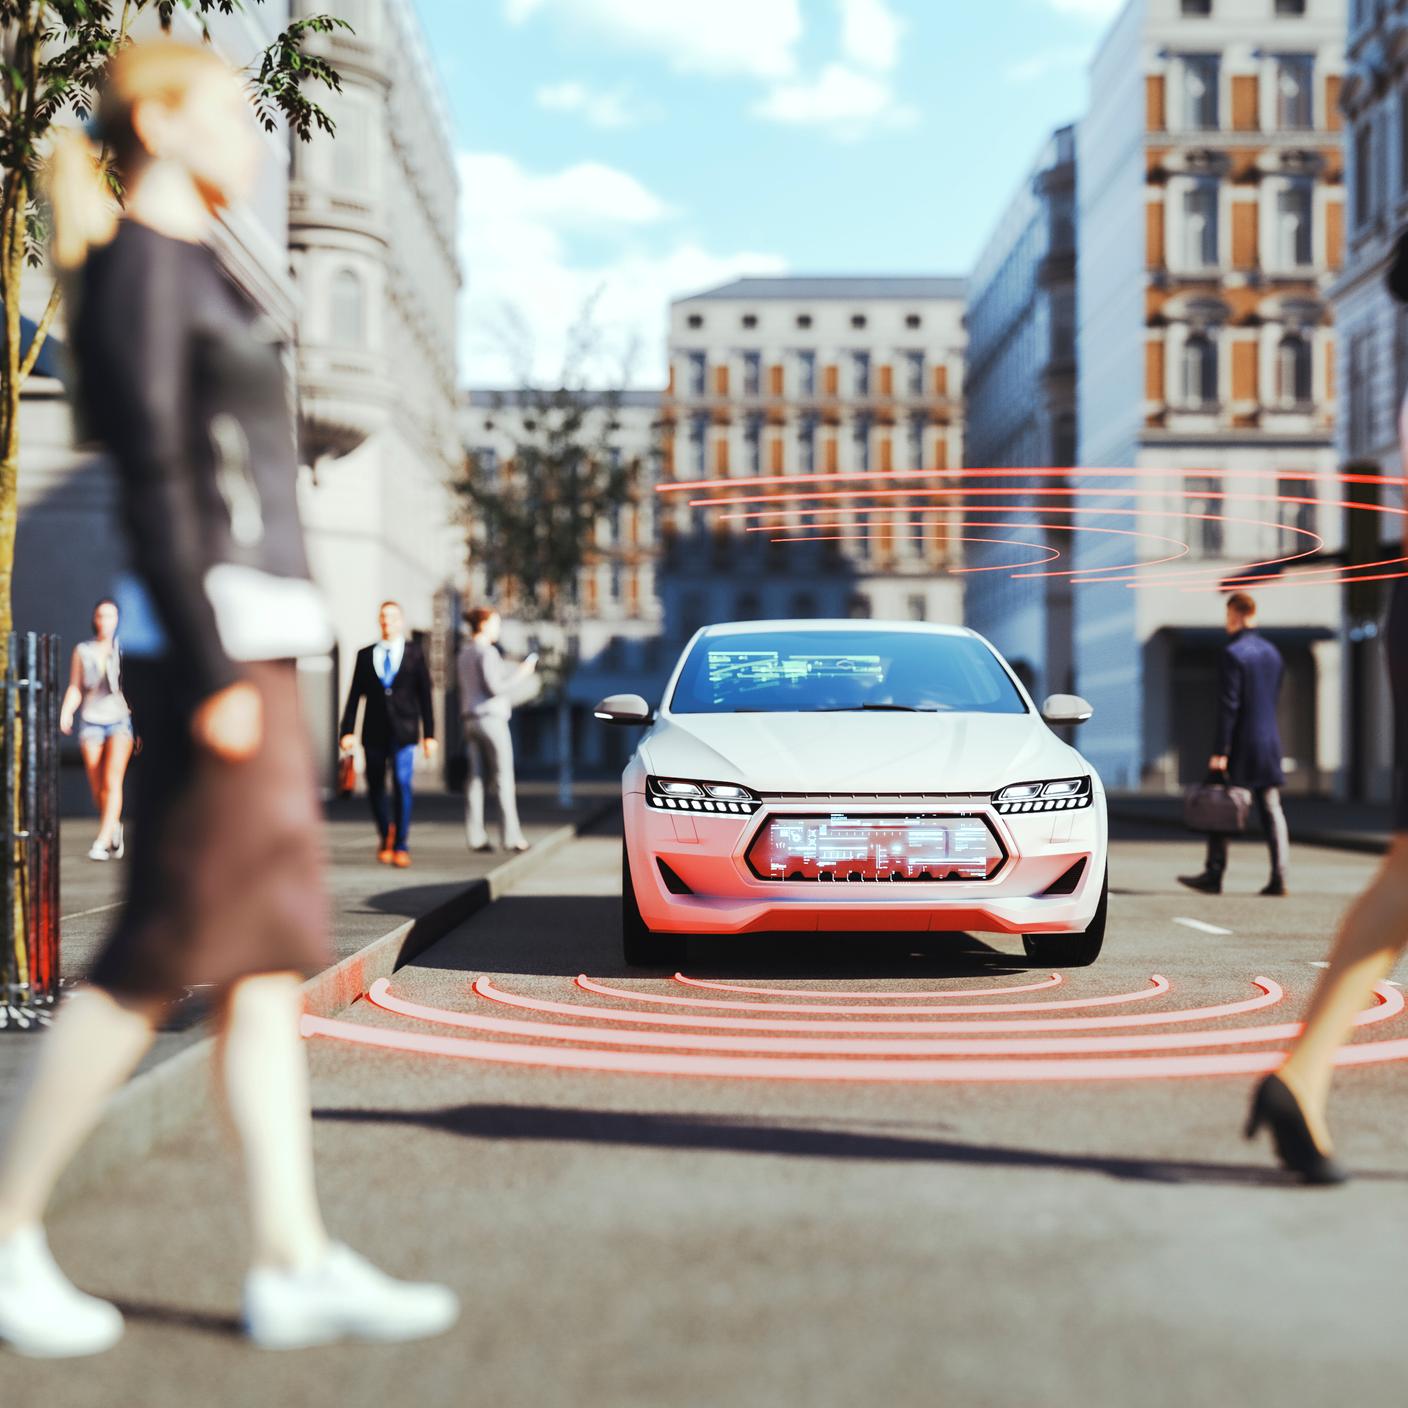 PAS 1881 - Assuring the operational safety of automated vehicles